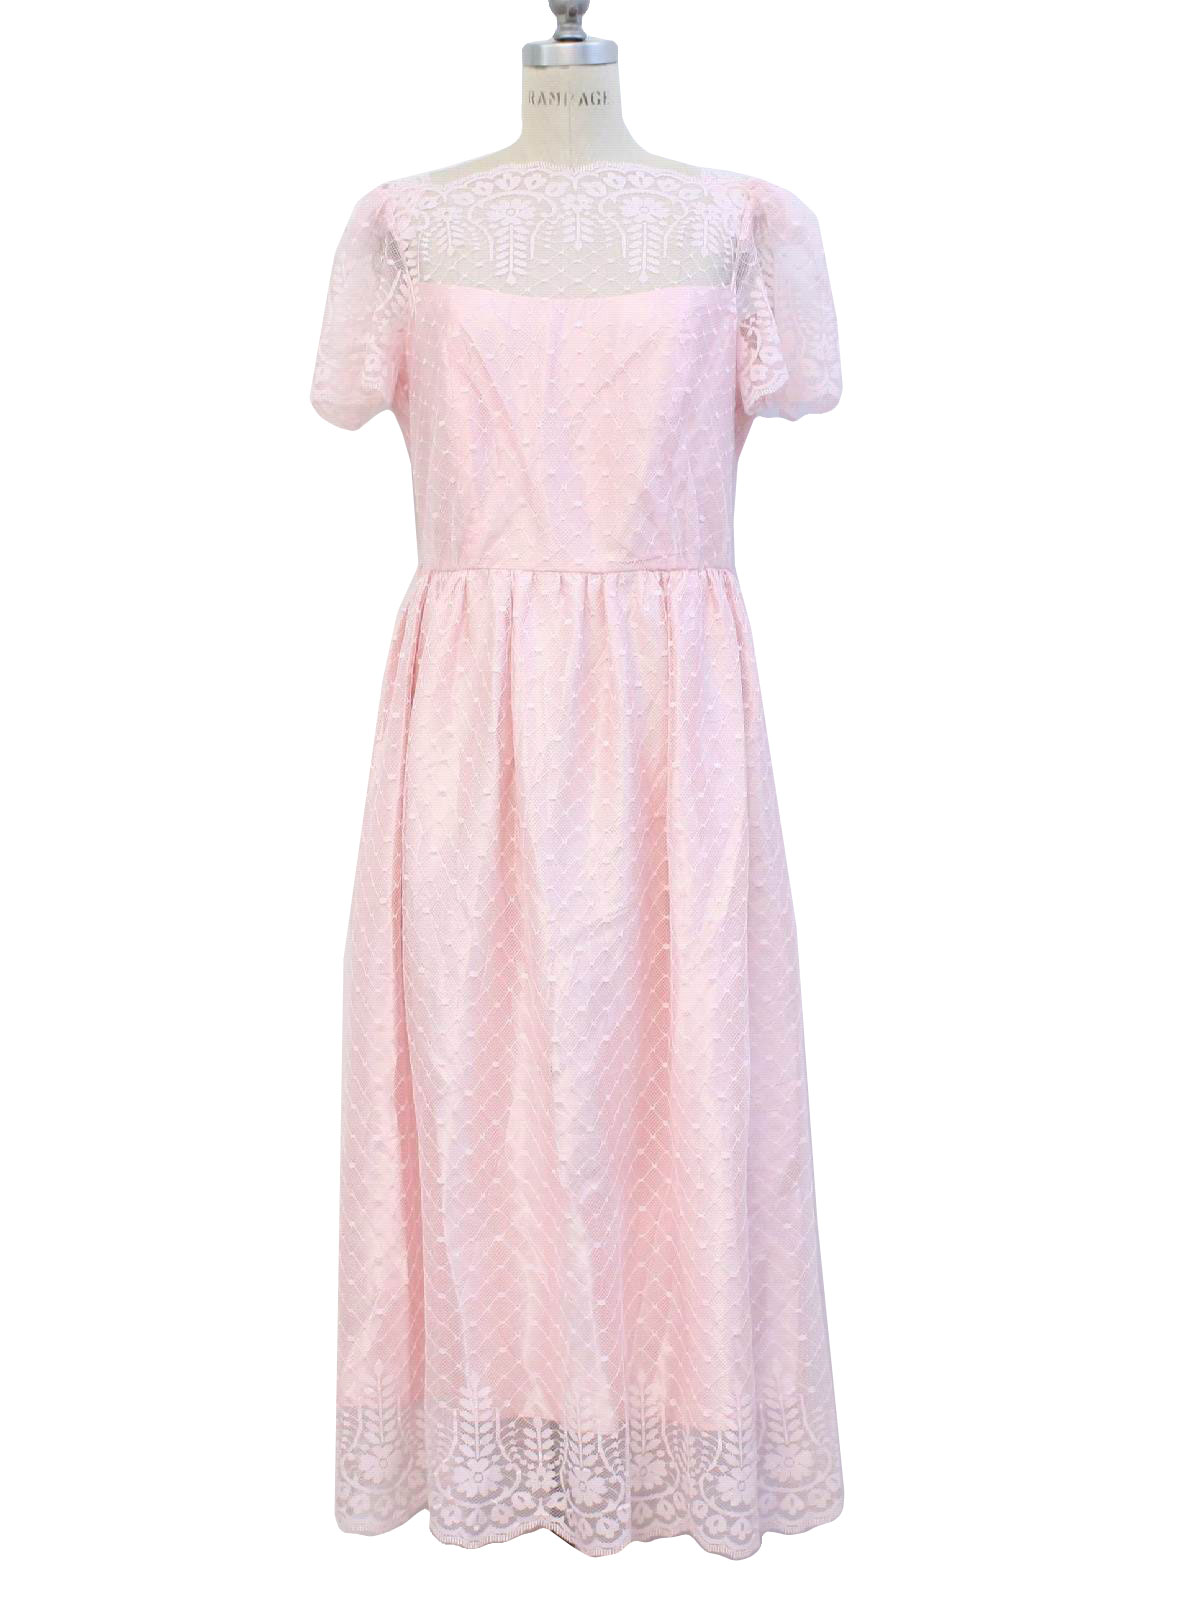 JCPenney 70's Vintage Cocktail Dress: 70s -JCPenney- Womens petal pink ...